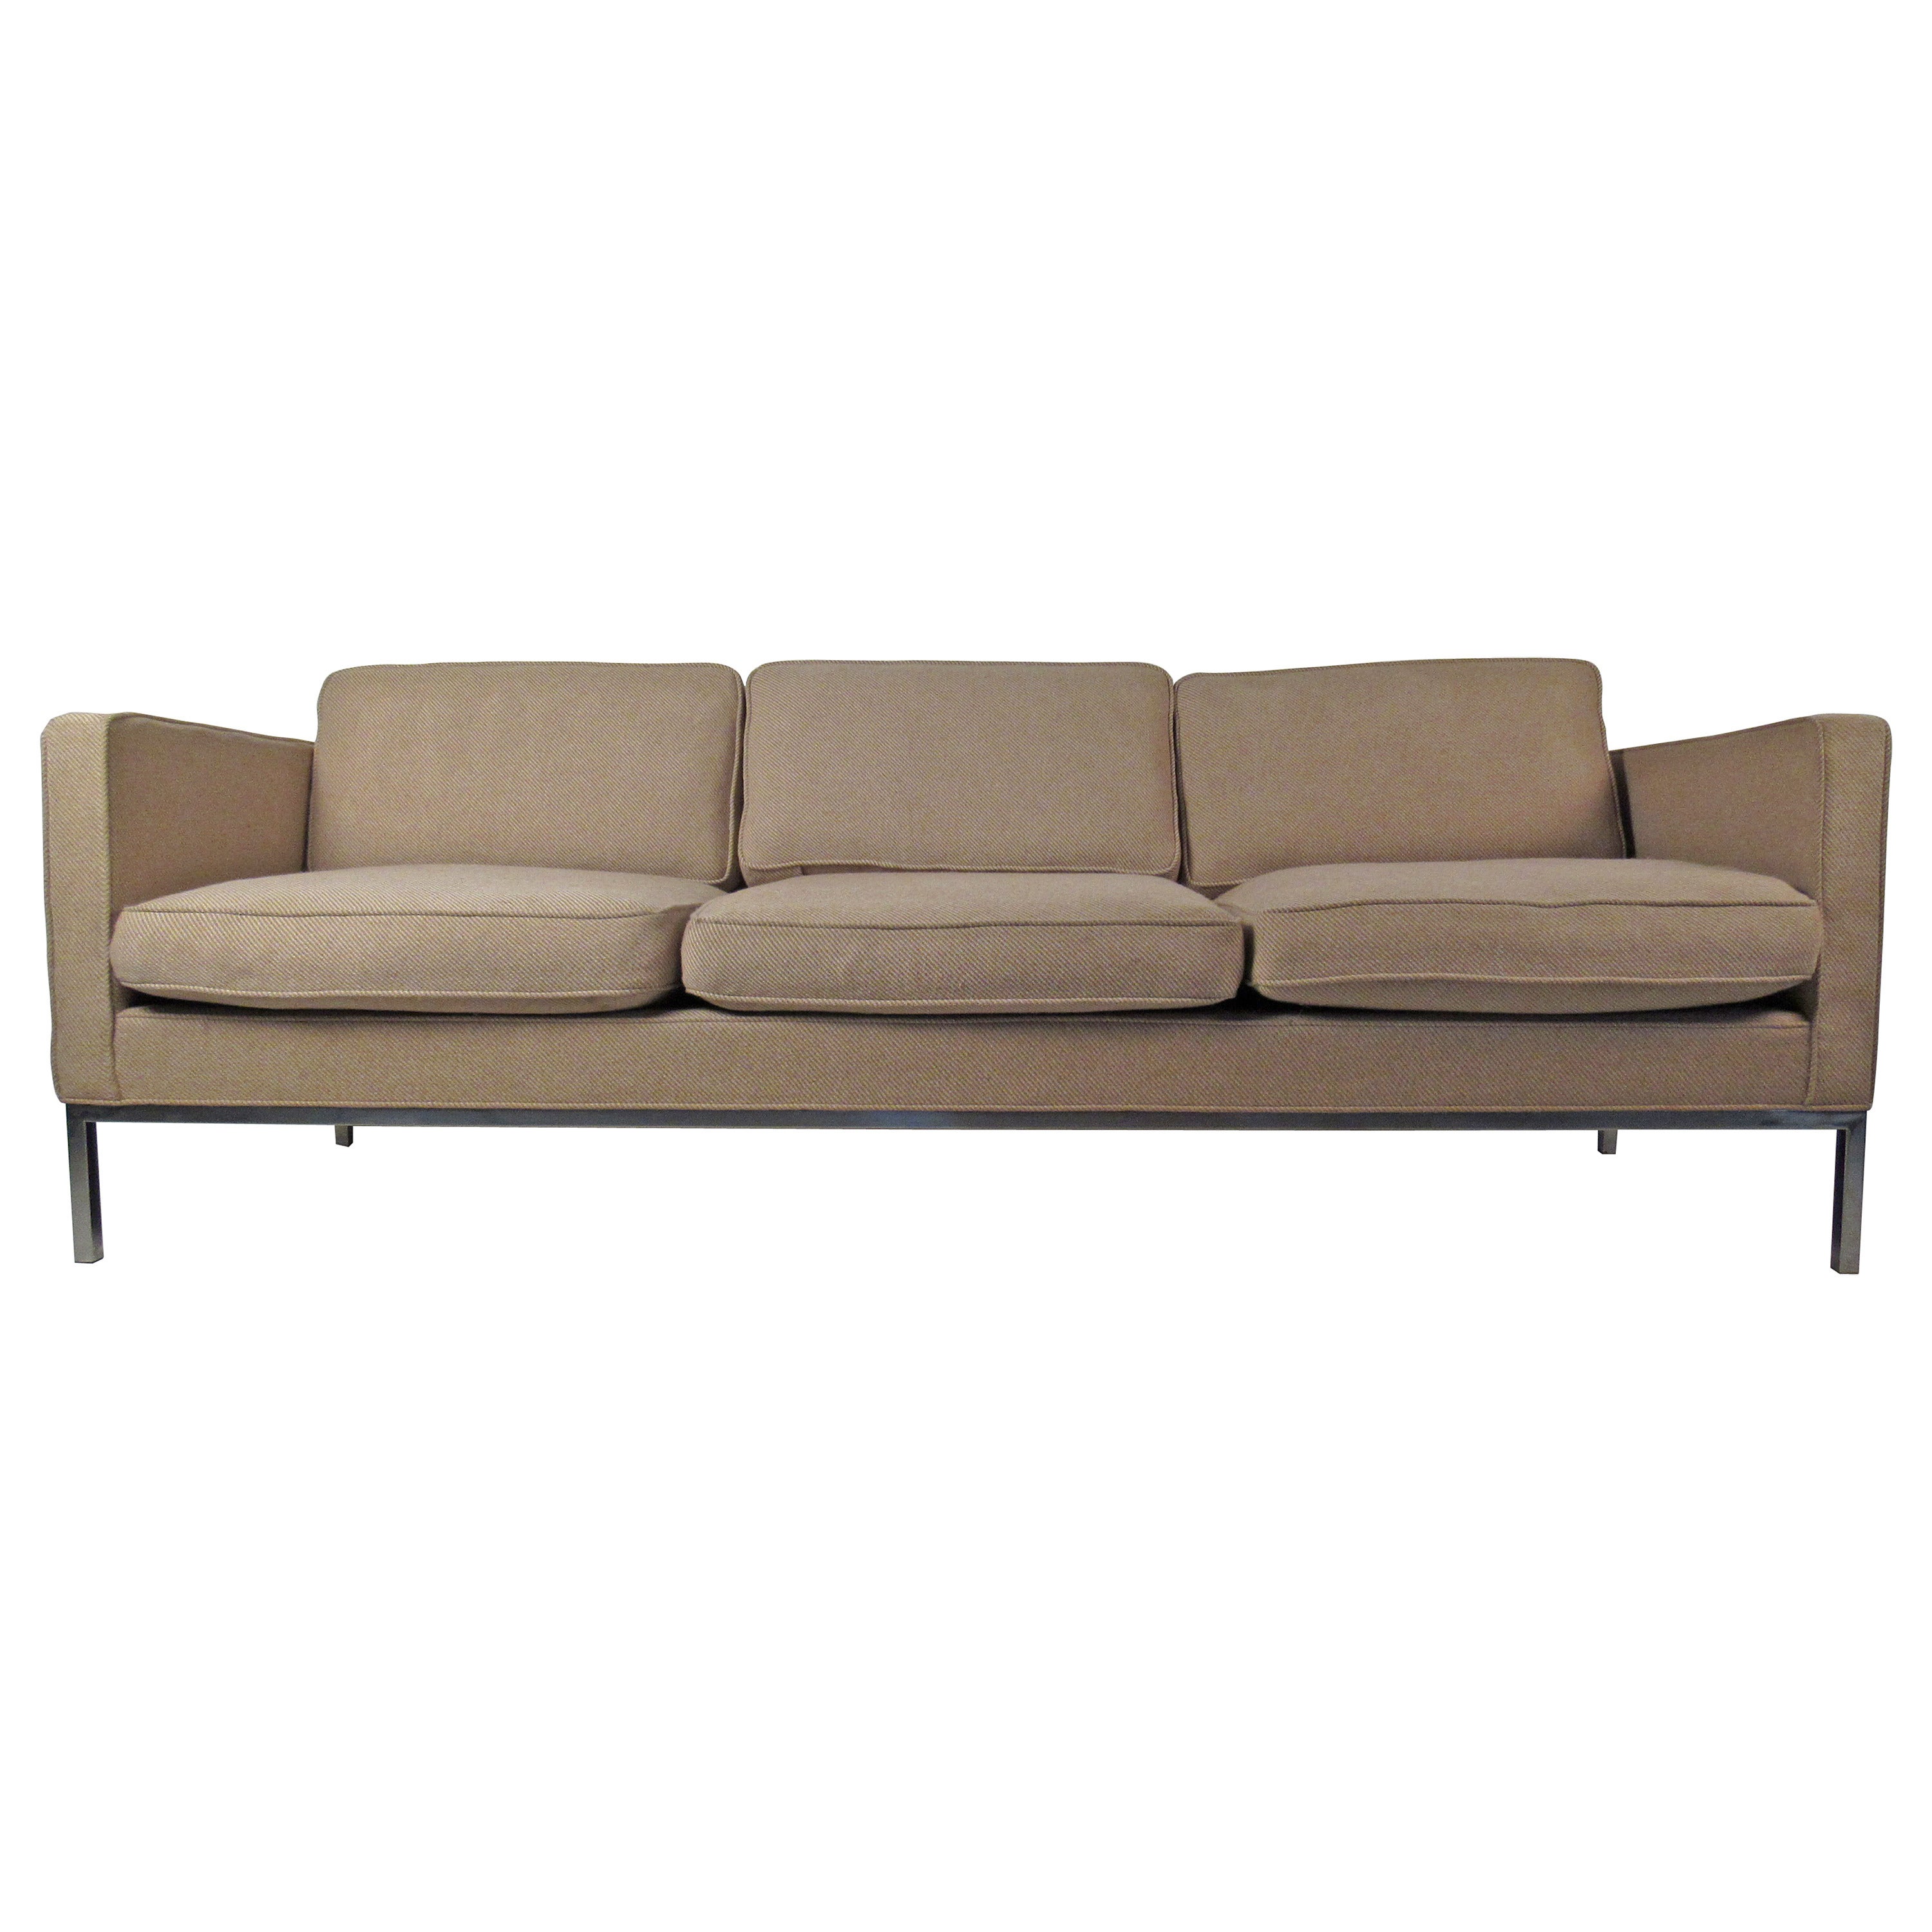 Mid-Century Modern Sofa in the Style of Knoll